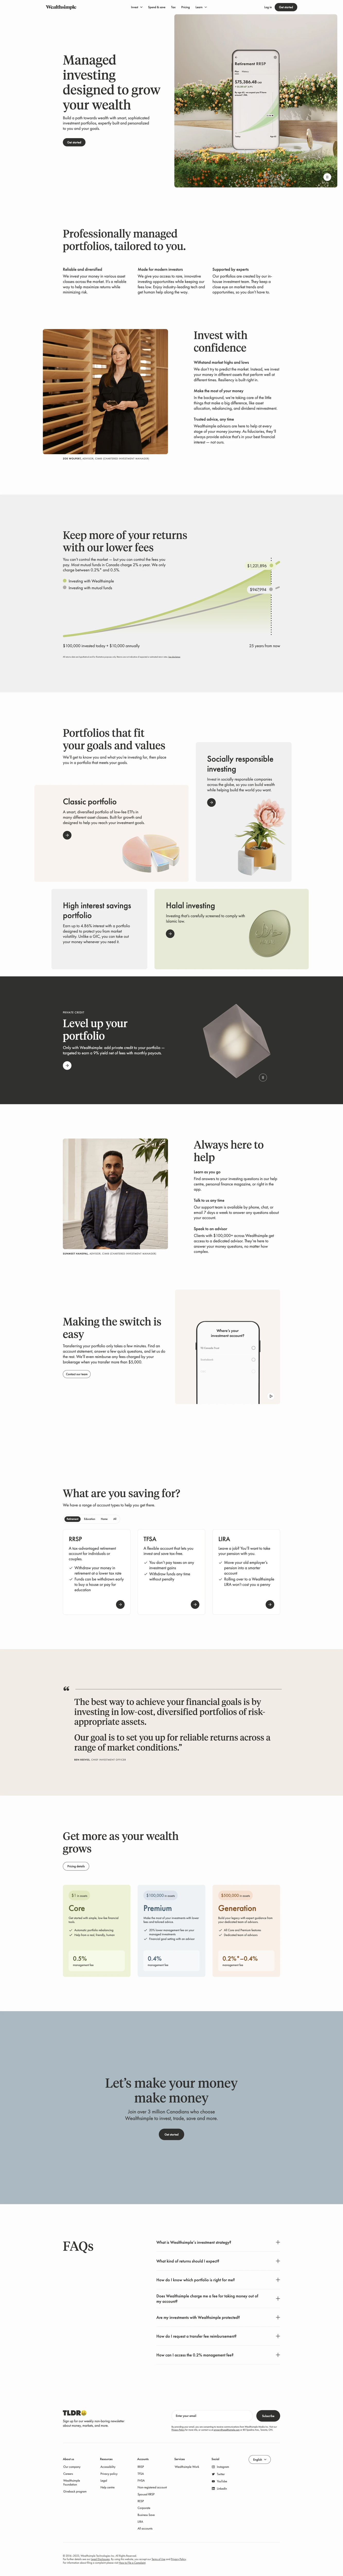 Wealthsimple Landing Page Example: Grow your money. Smart investing tools and personalized advice designed to build long-term wealth.